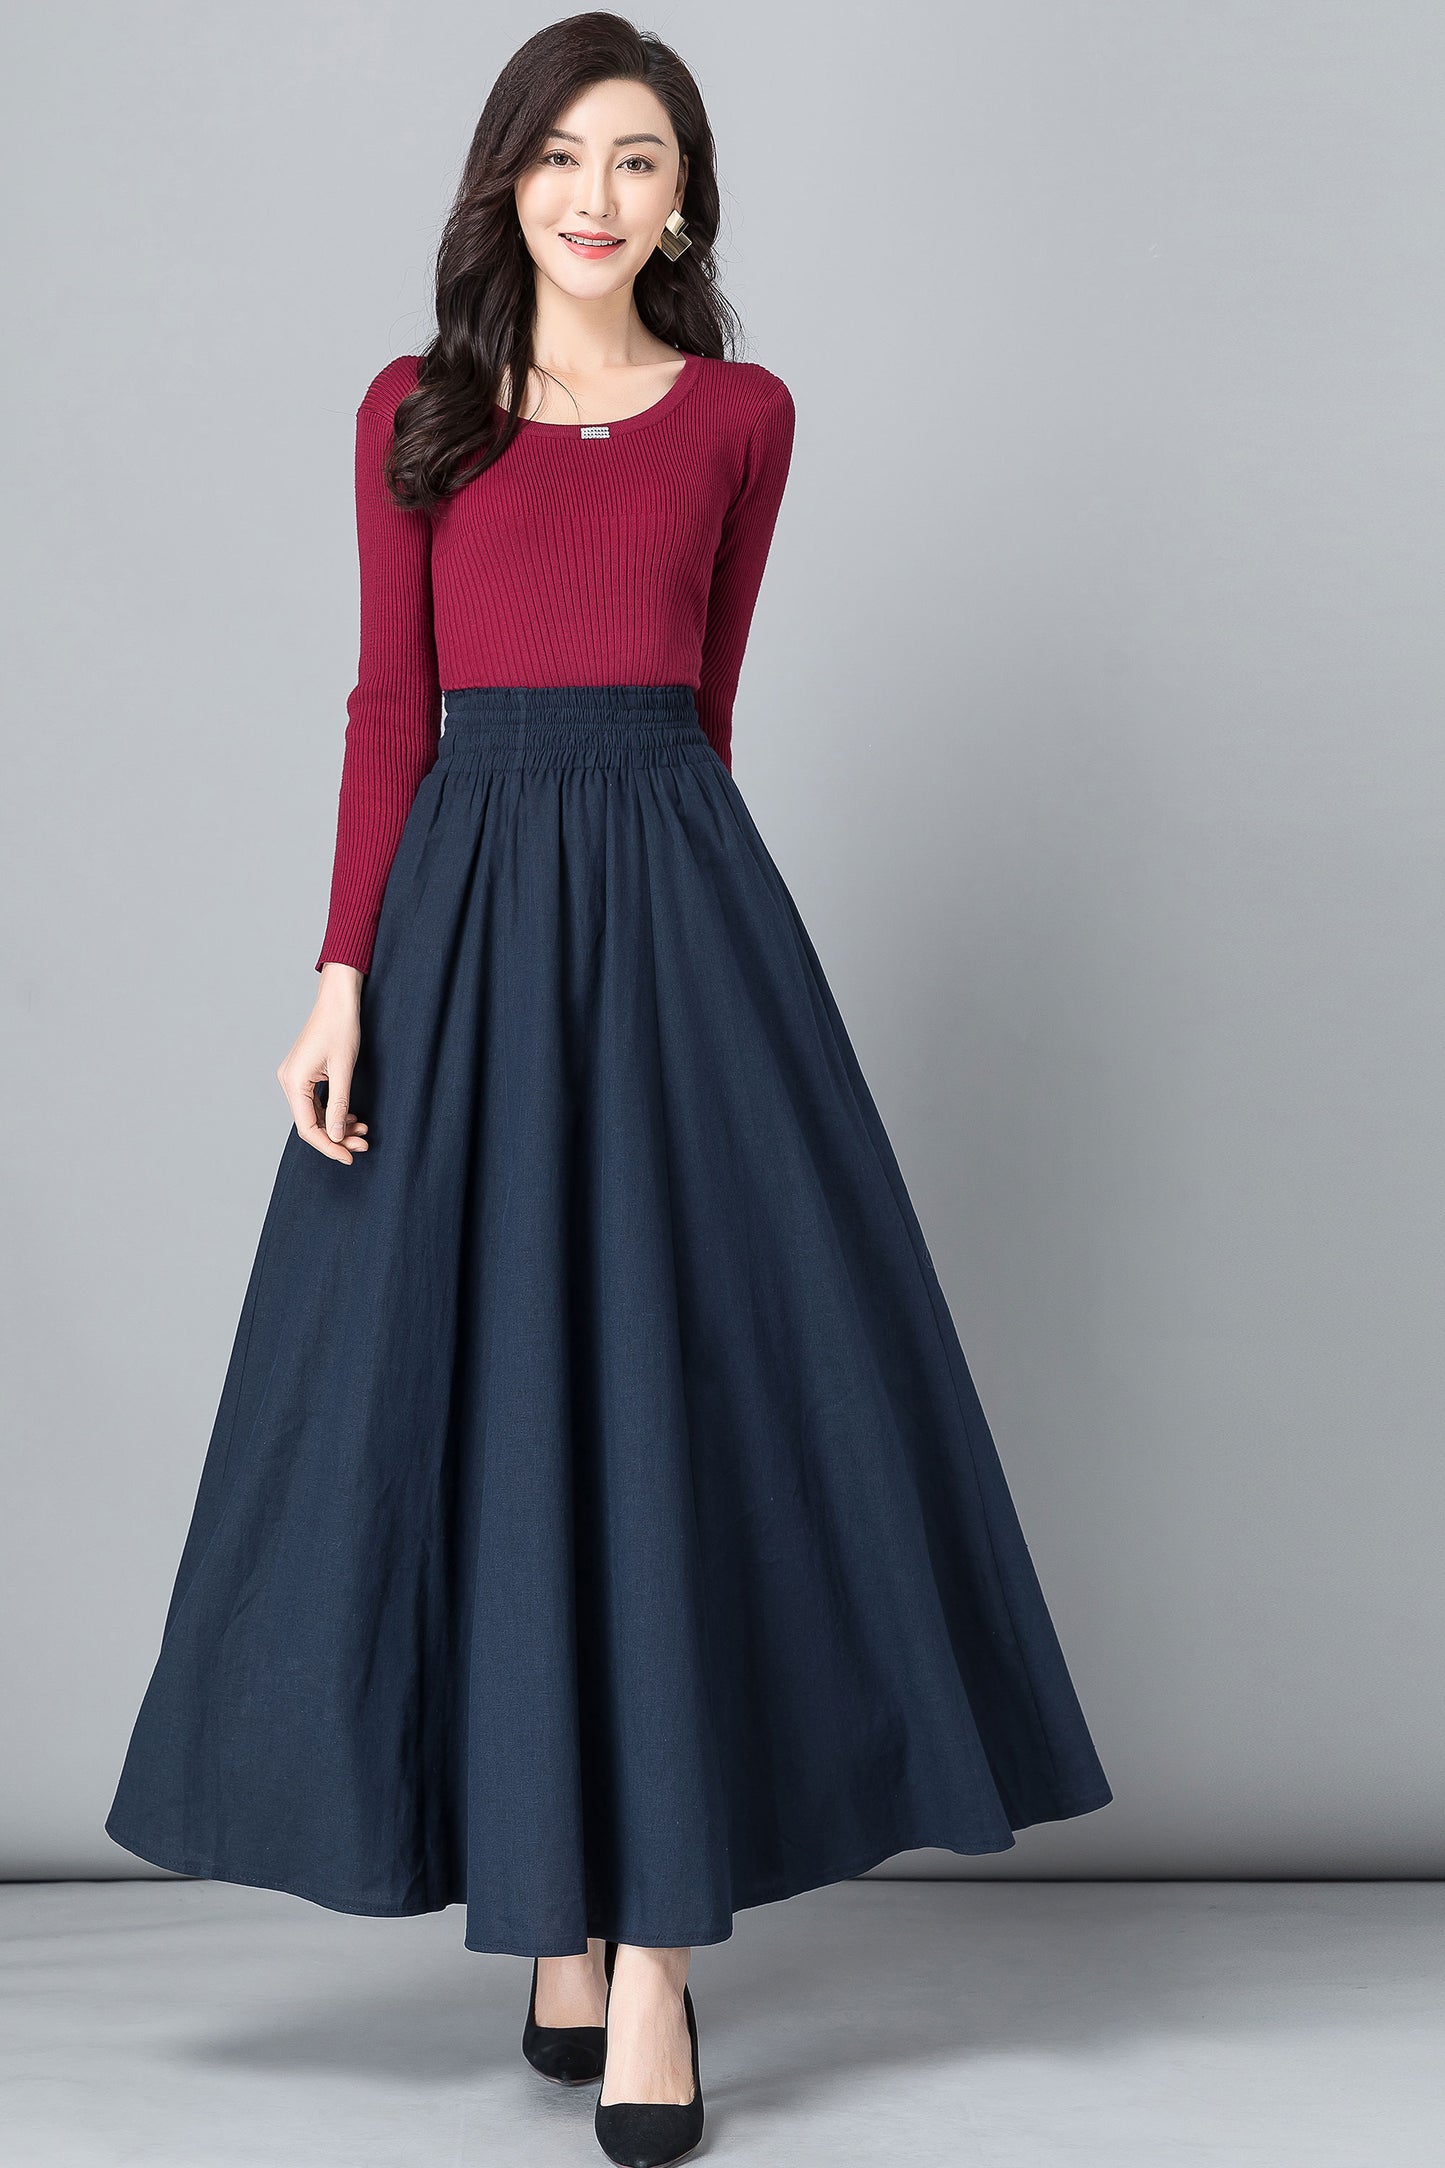 Blue High waist Long pleated Swing Skirt with pockets 2532#